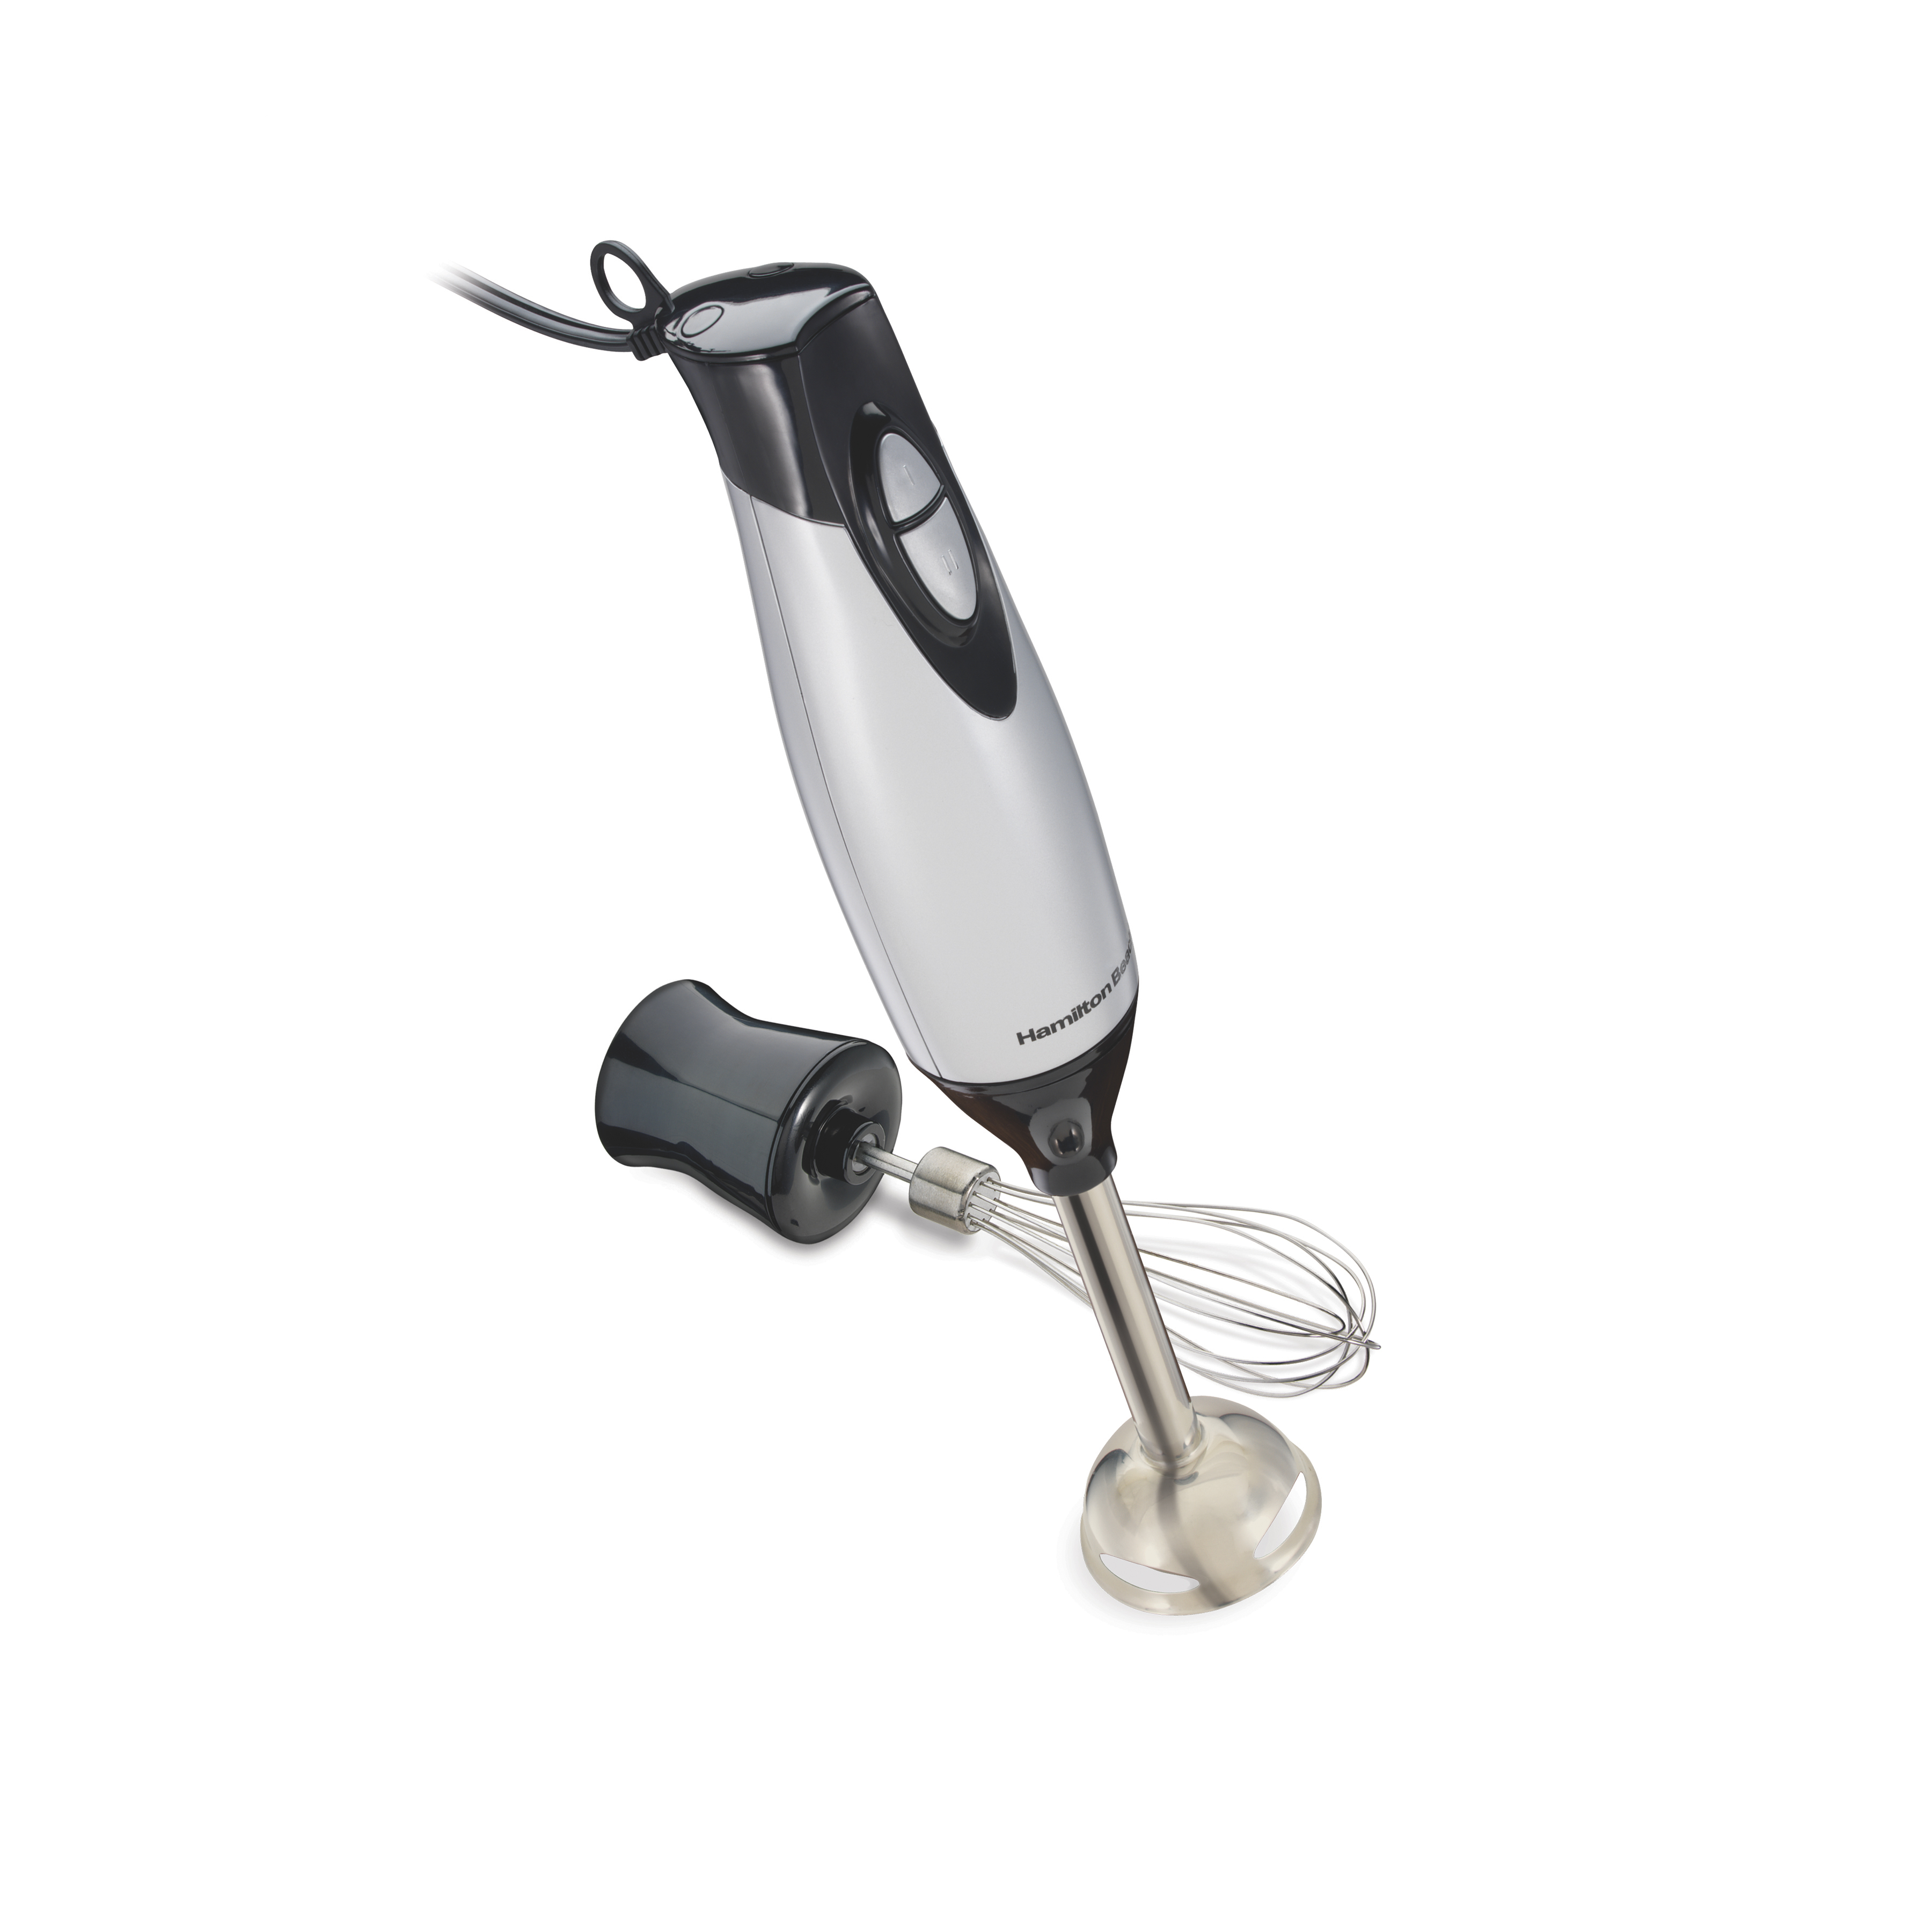 Hamilton Beach 2-Speed Hand Blender with Whisk Attachment, New, 59762F - image 1 of 10